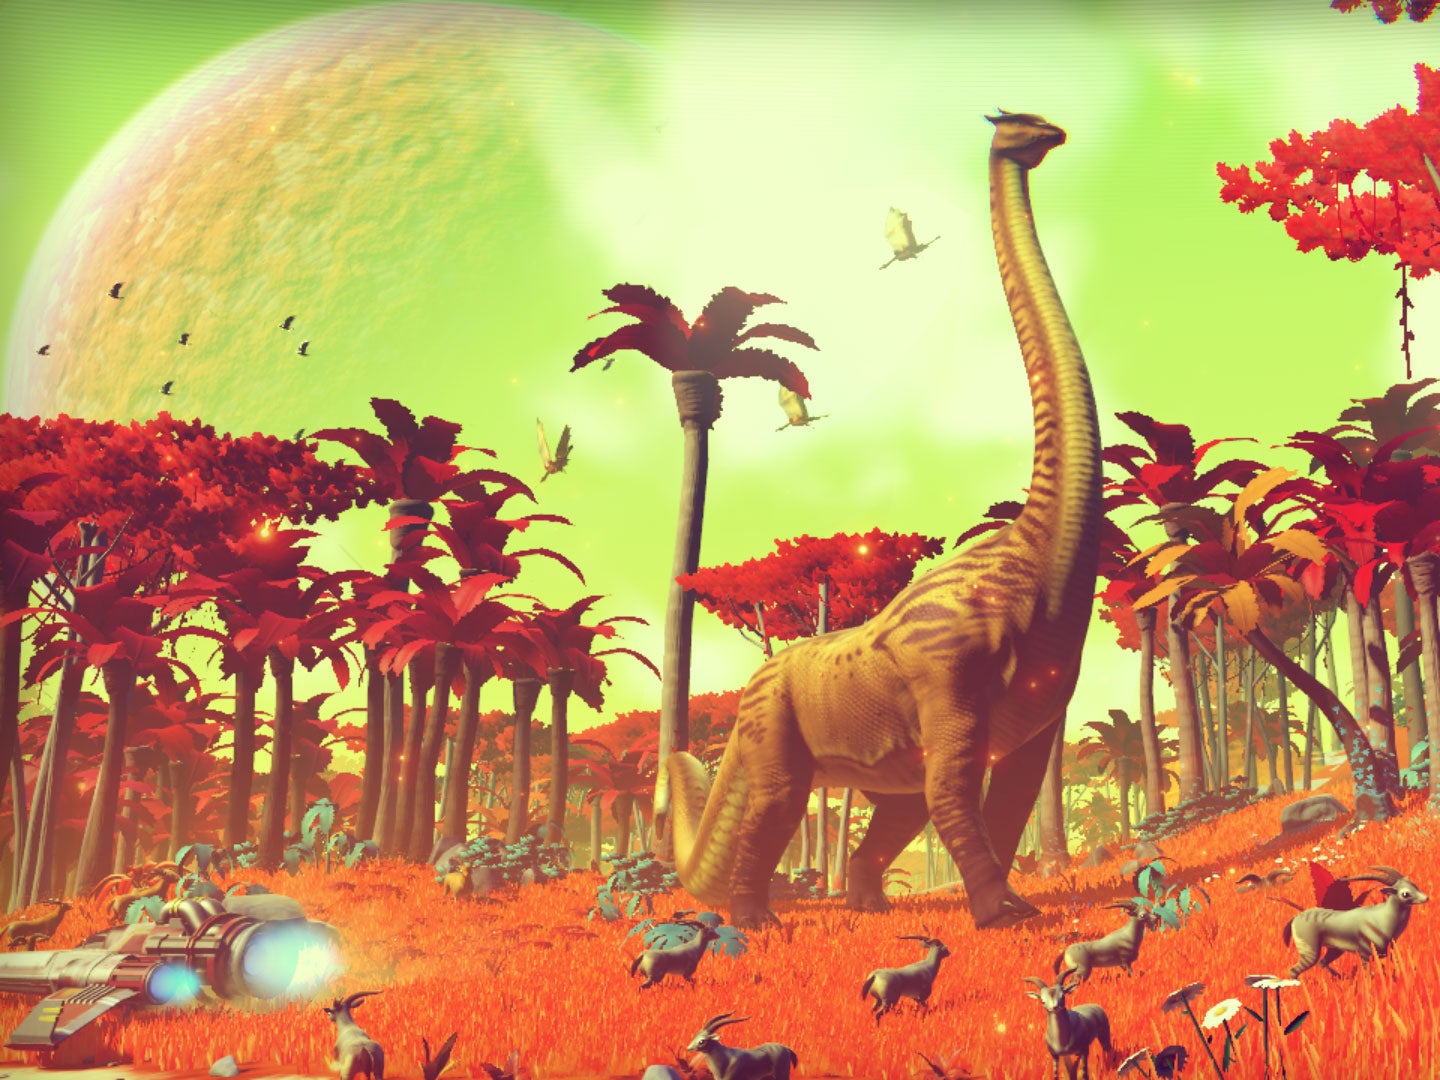 One of the planets players will be able to explore when No Man's Sky comes out